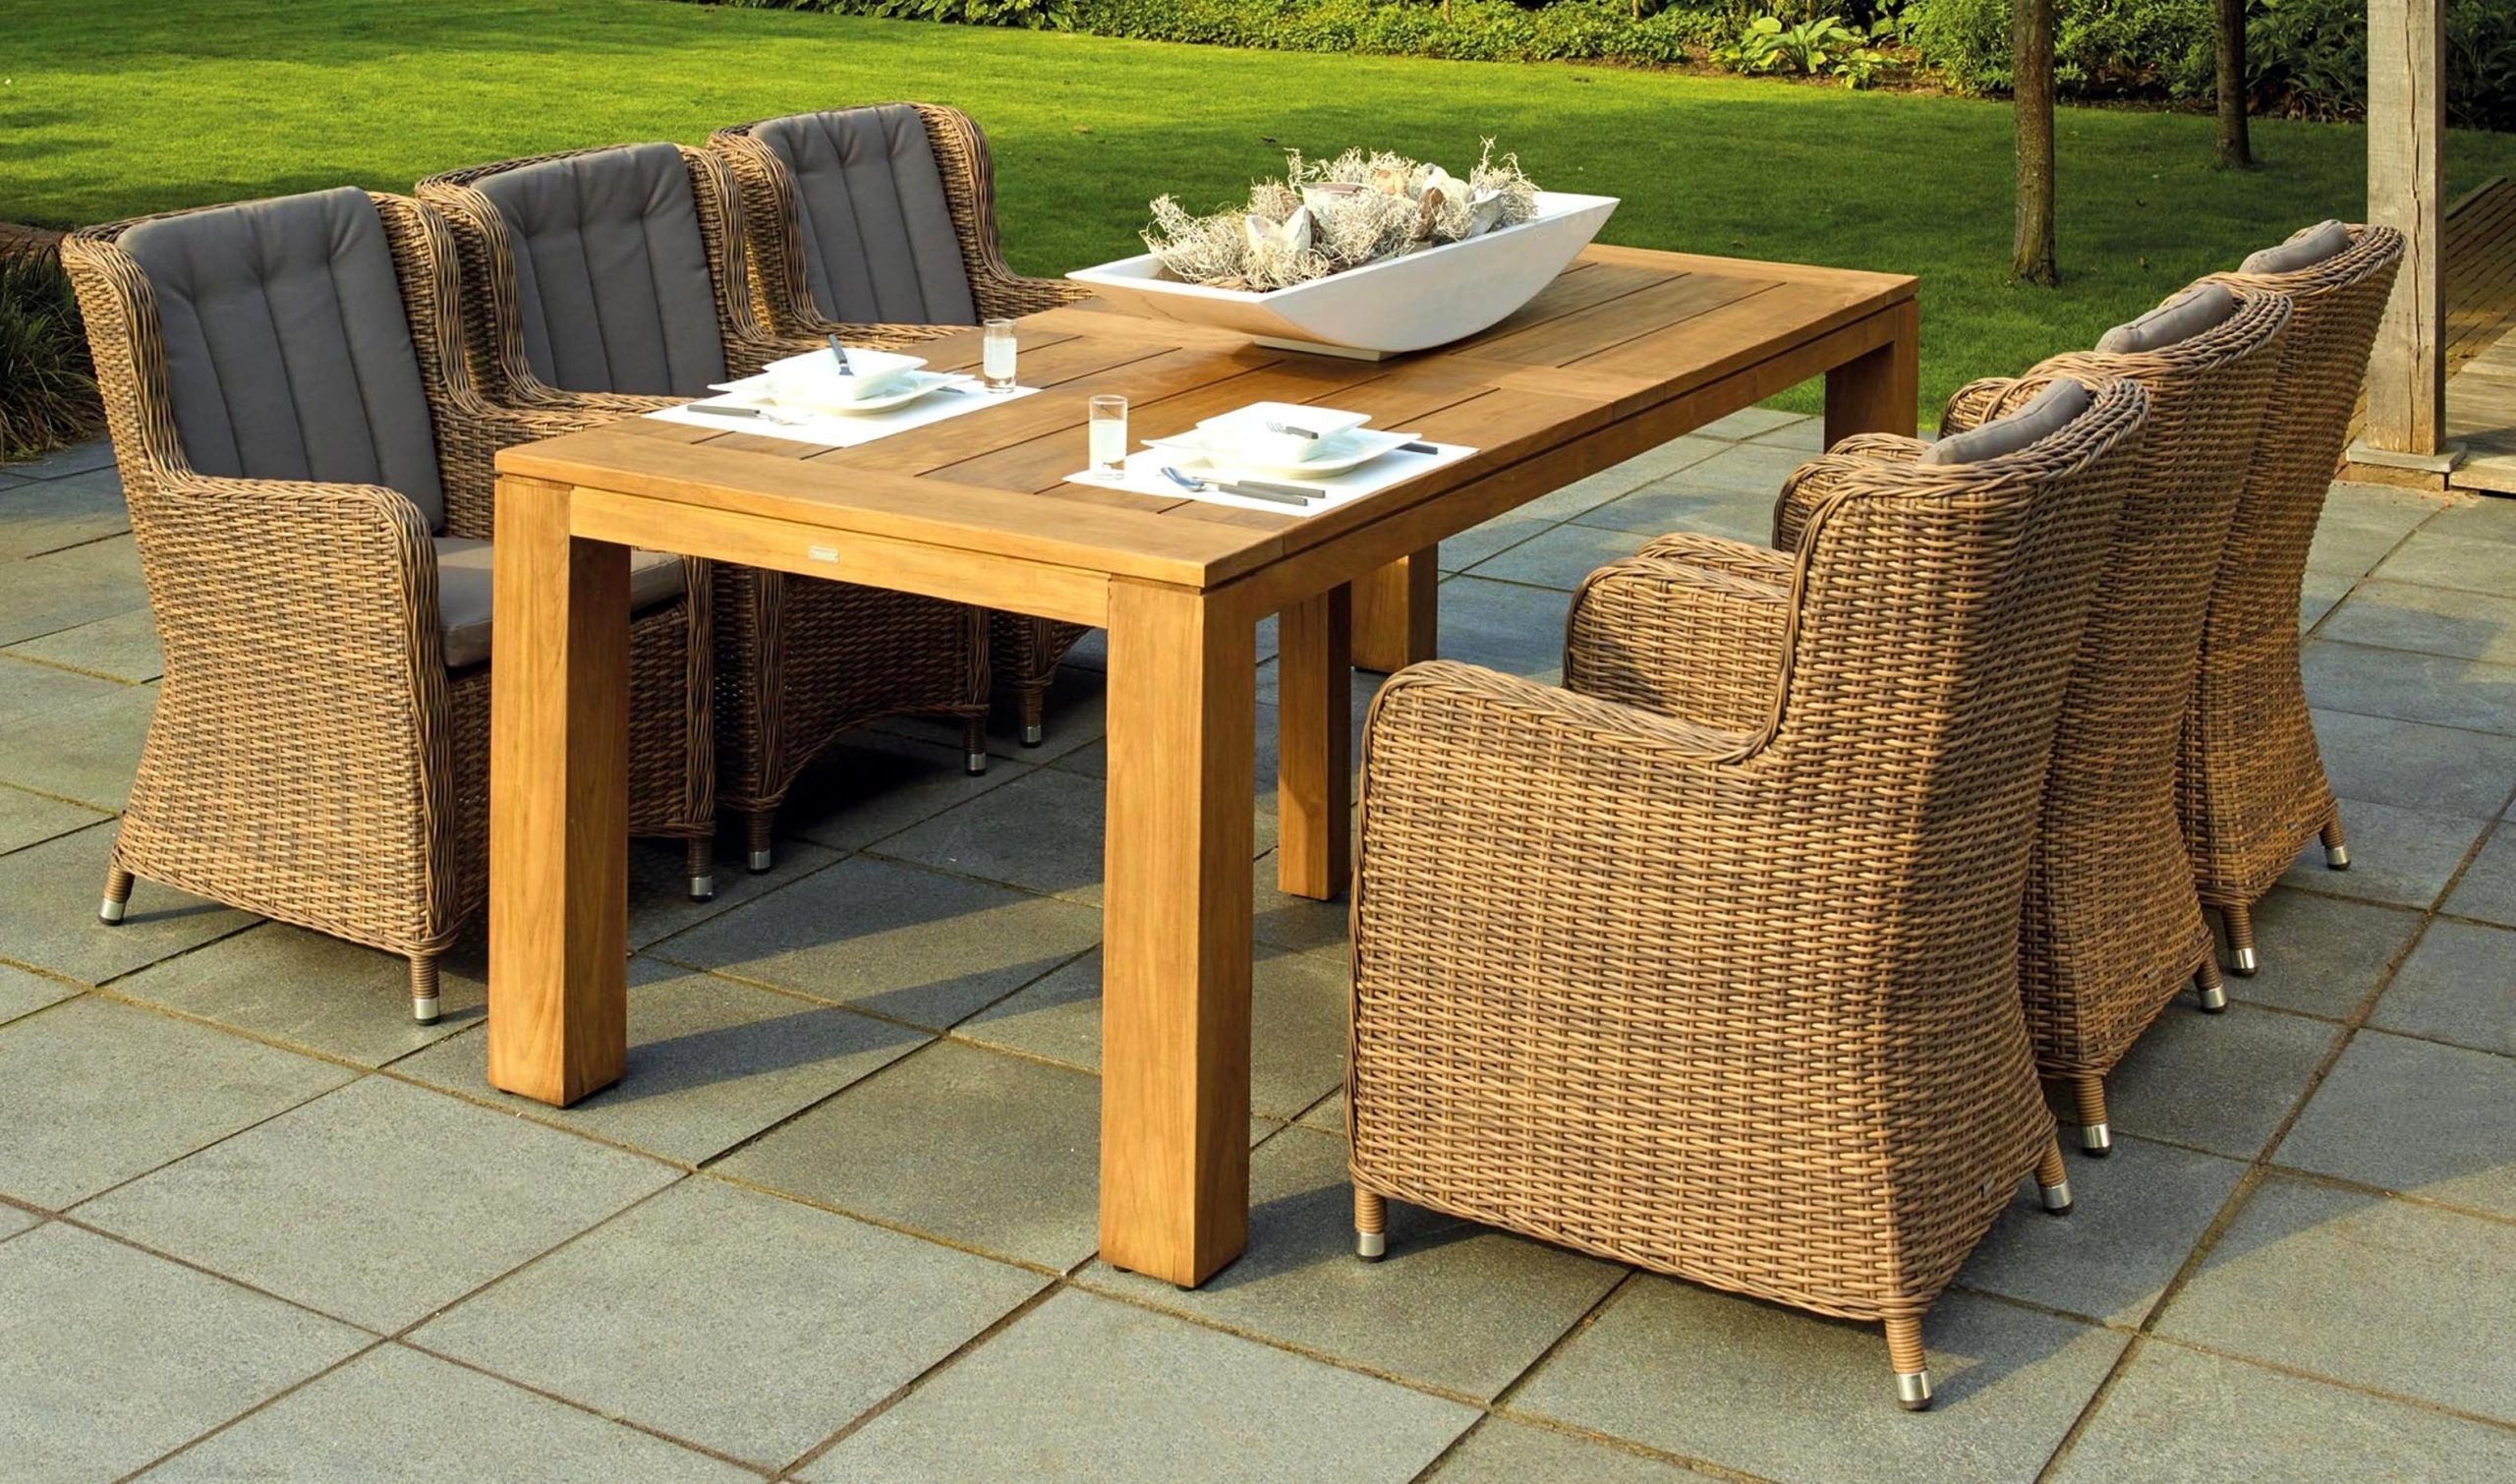 Luxury Dining Table for Outdoor Entertainment